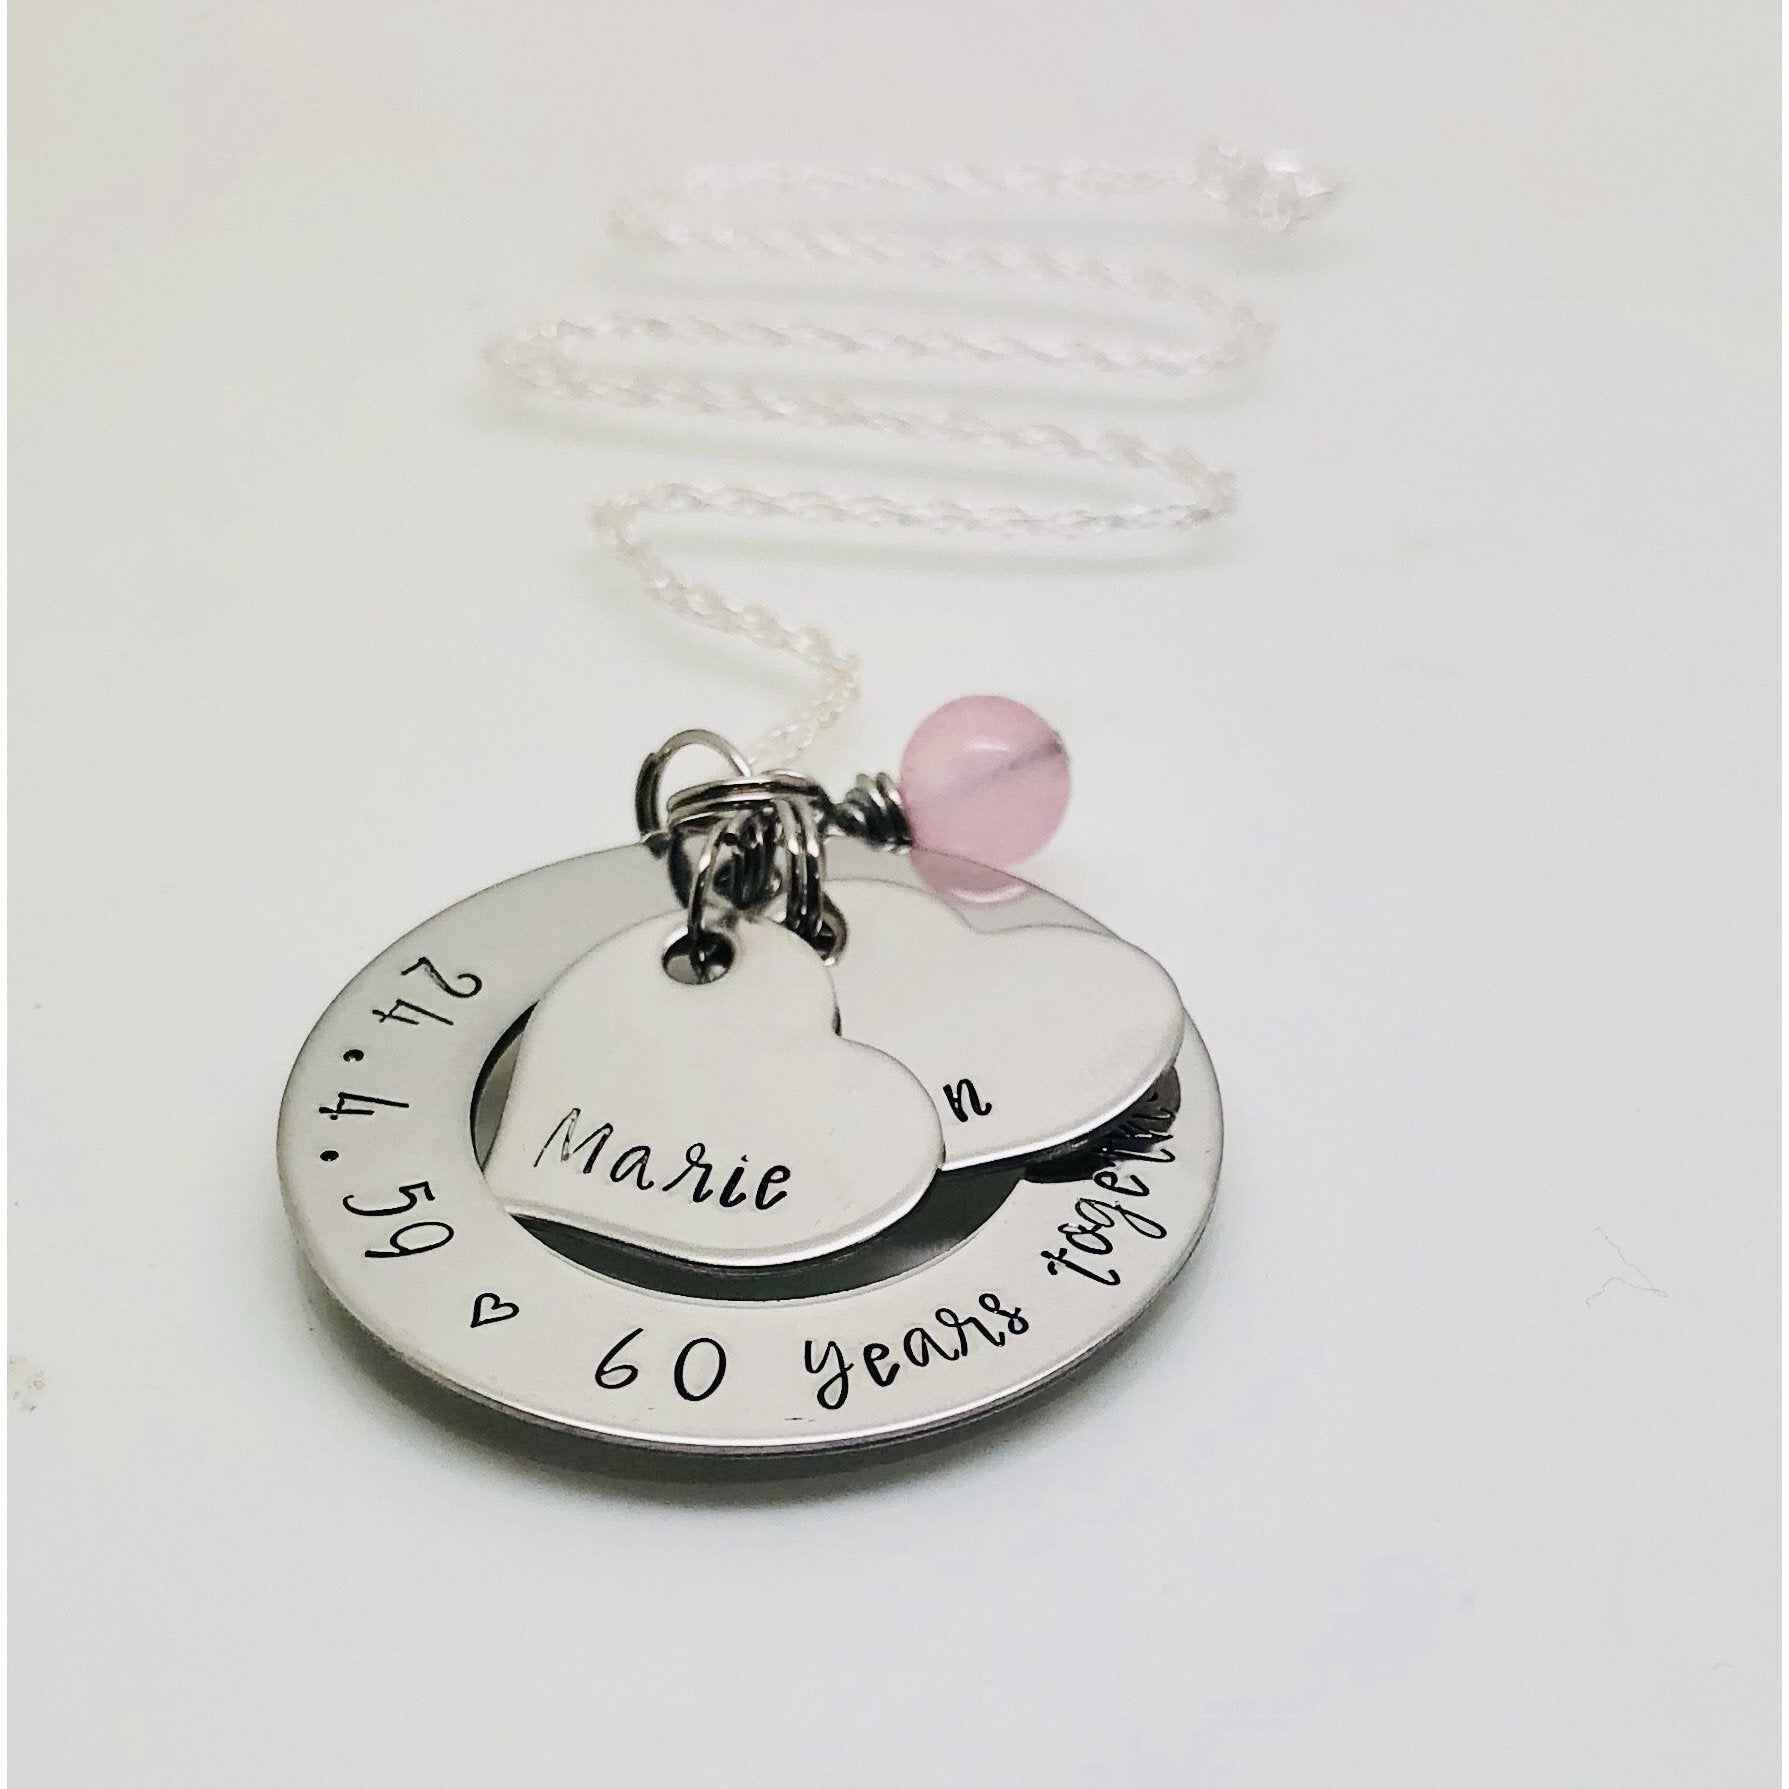 Personalised Custom Engraved Jewellery Date Necklace Gifts for Her  Anniversary | eBay